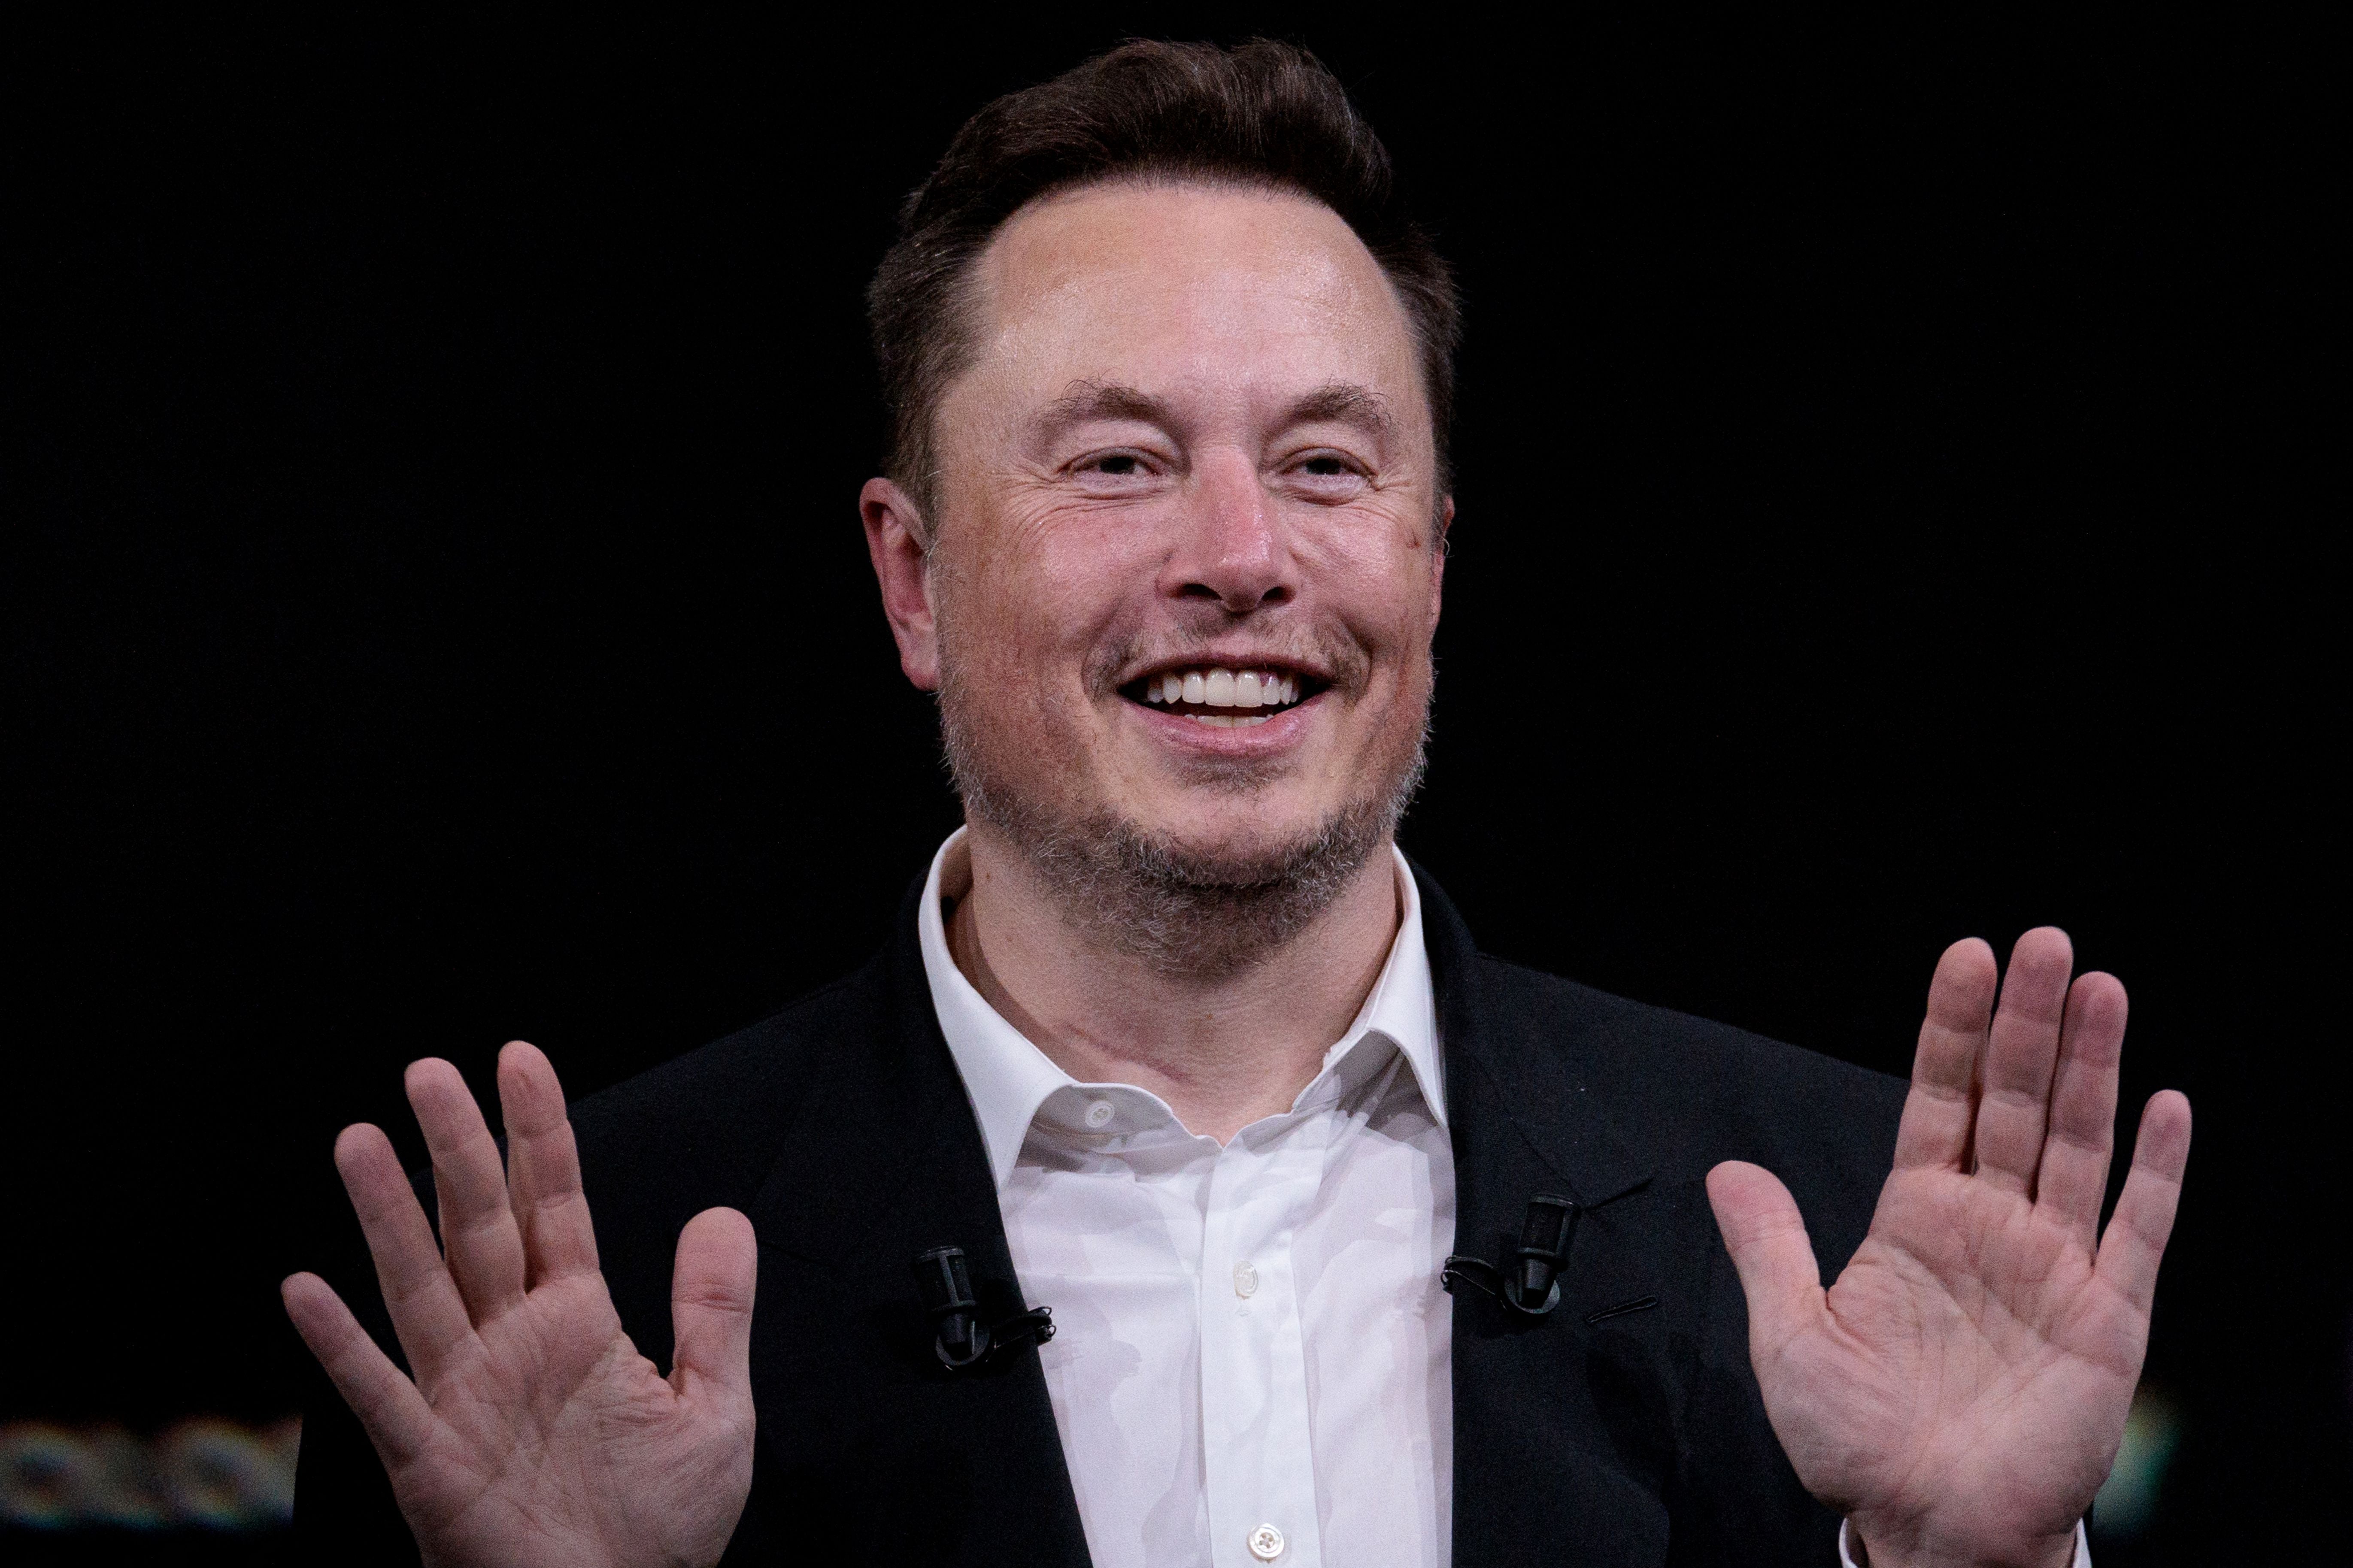 Elon Musk has sparked backlash after claiming the word ‘cis’ is a ‘heterosexual slur’.